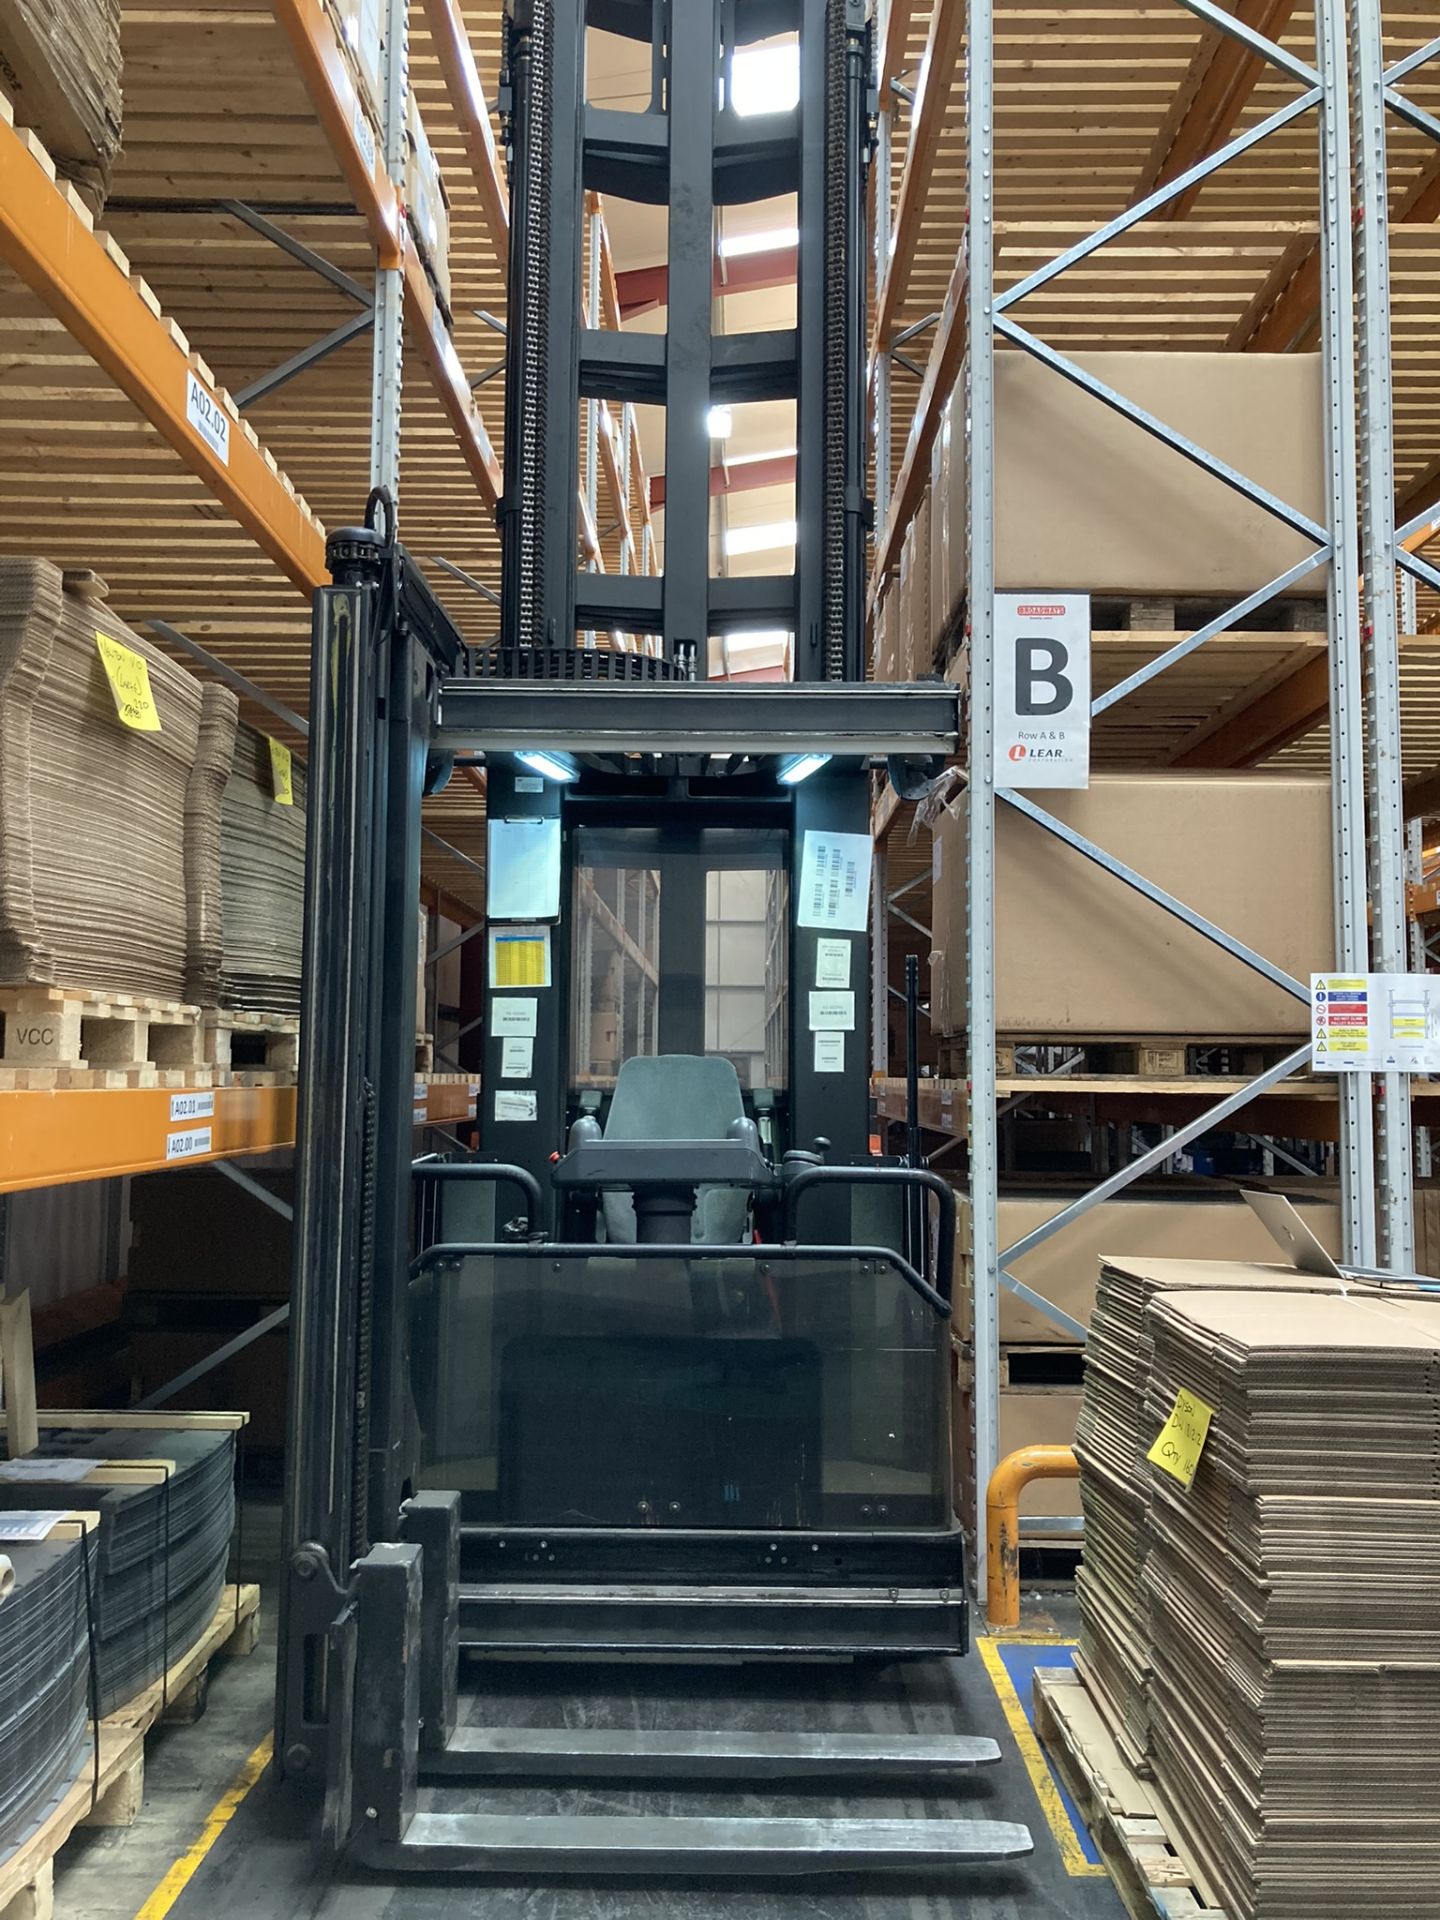 1 BT (Toyota) Vector, VCE 150A, Very narrow aisle electric forklift with charger, Serial Number: 64